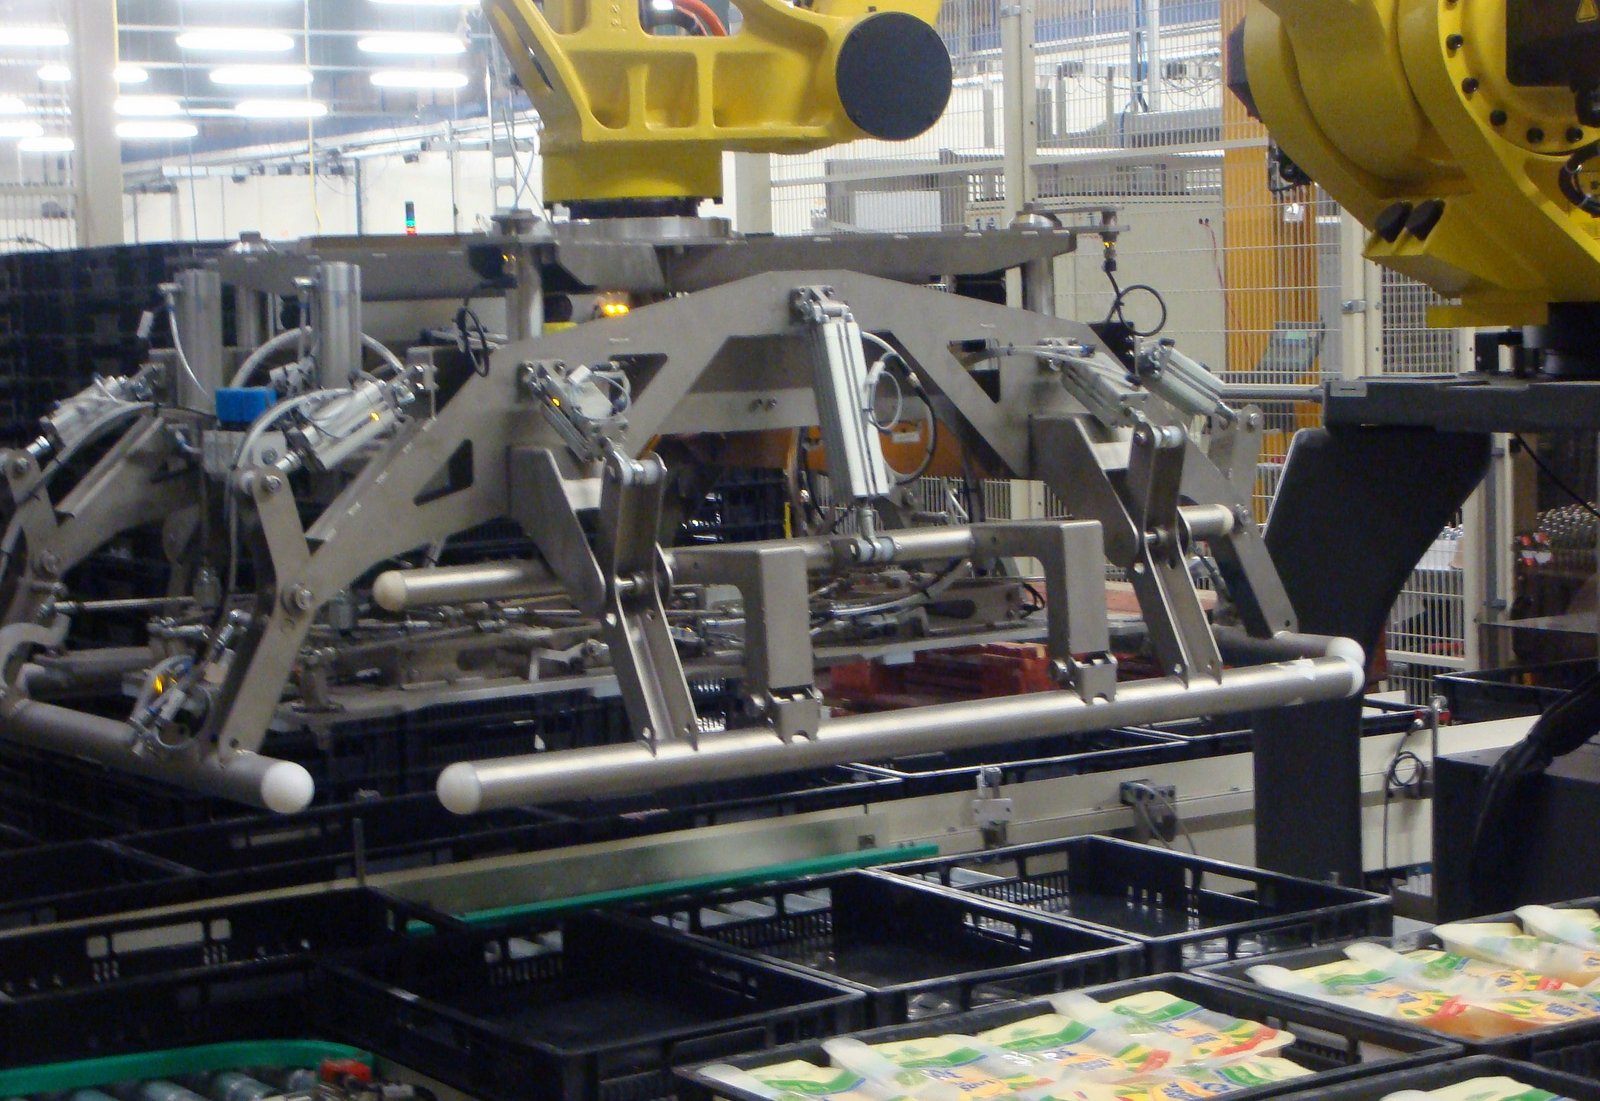 Fanuc-robot-for-handling-CBL-crates-with-cheese